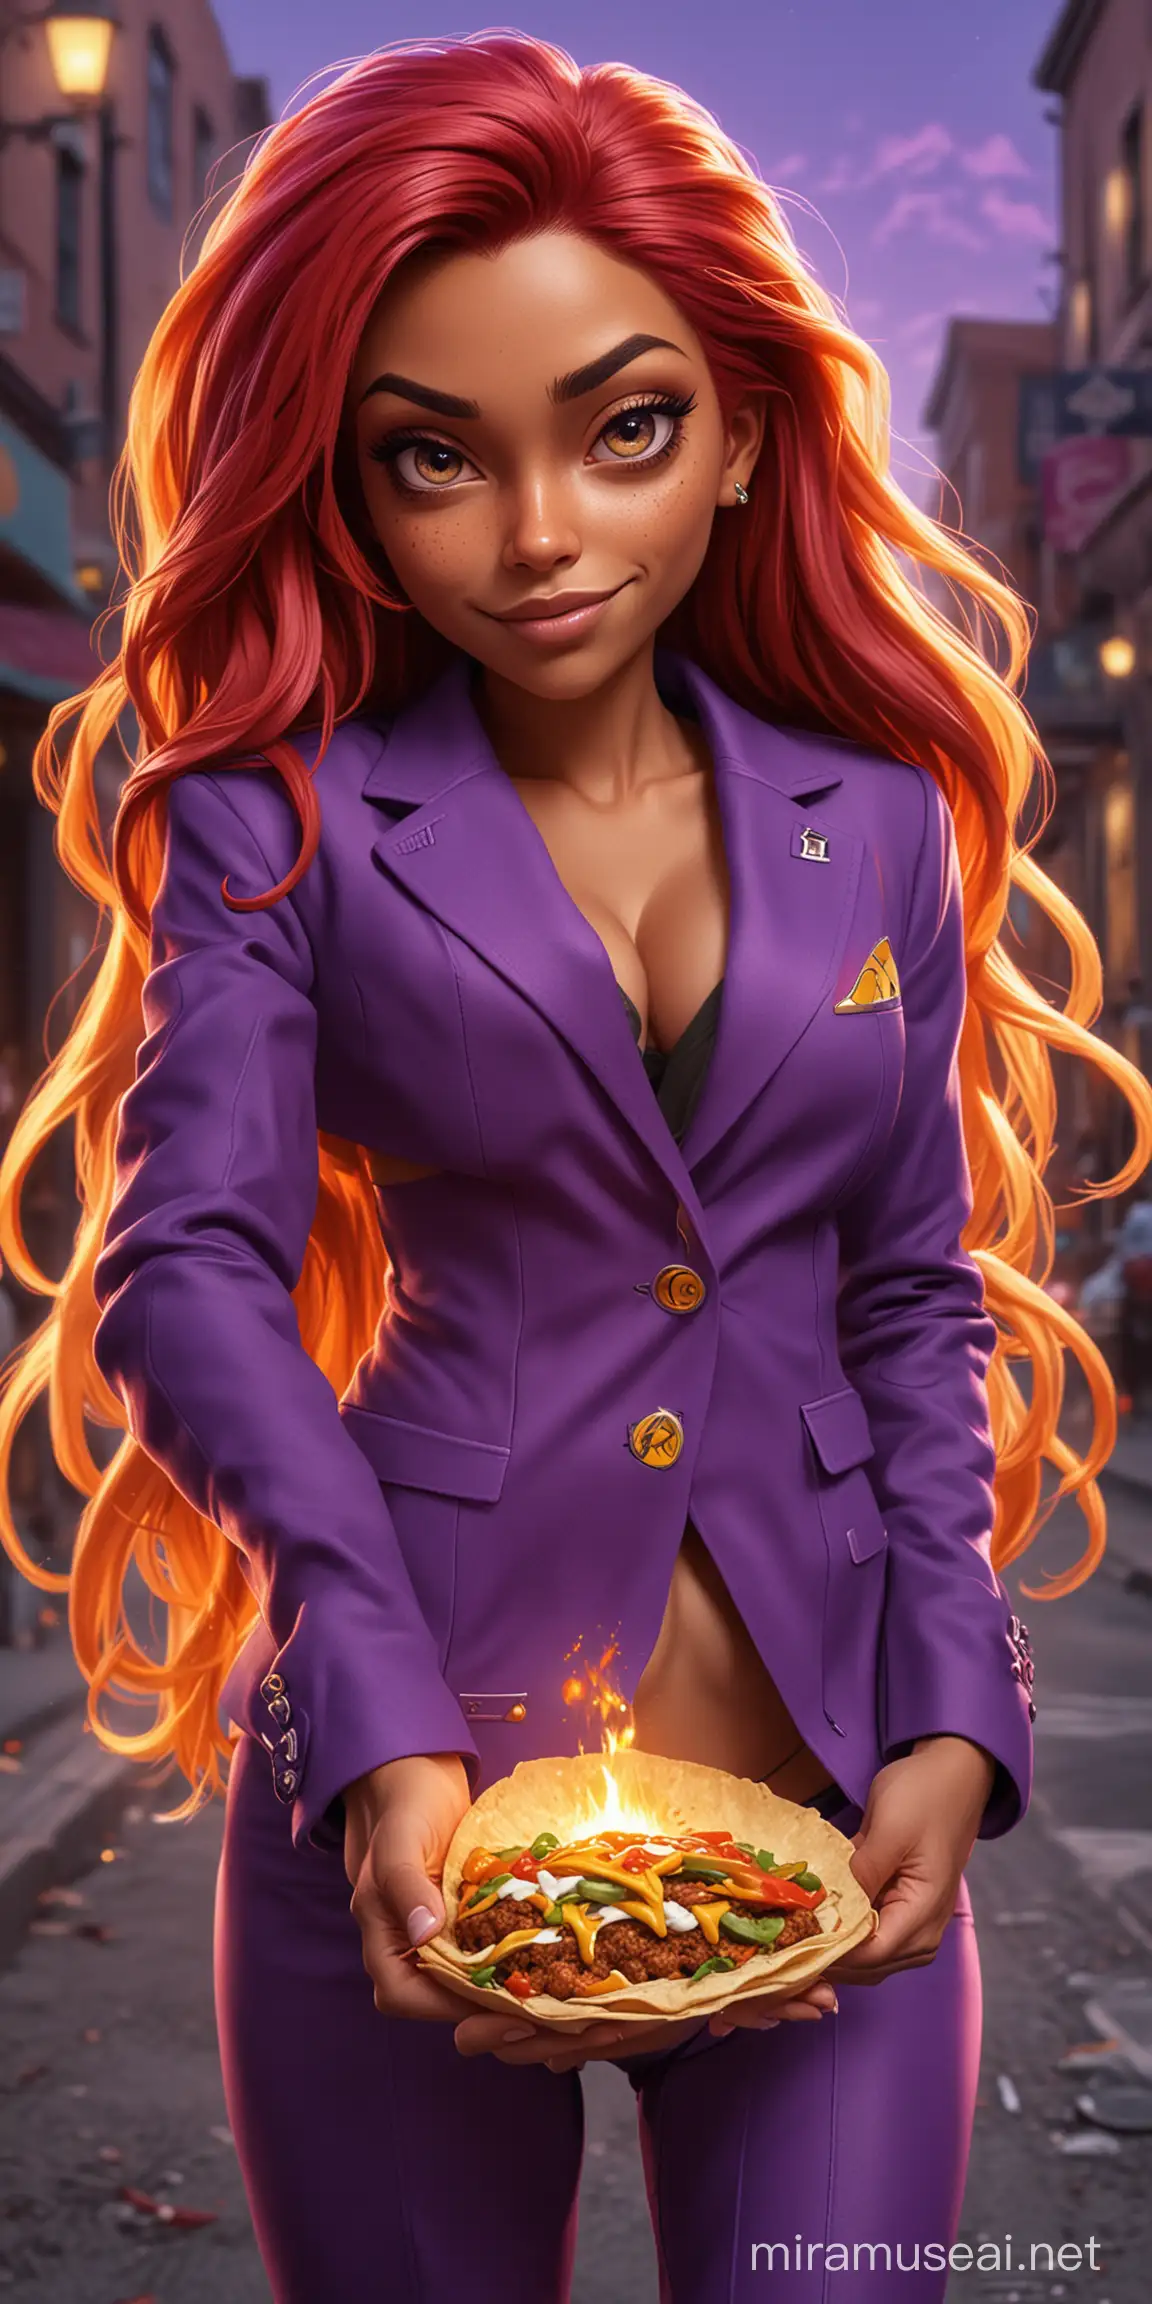 make a realistic starfire character with caricature art style, playing video game, unique pose, fire background, fierce expression, purple suit, red hair, eyes looking to the camera, power coming out from both hands, high contrast, full body, eating taco on the street